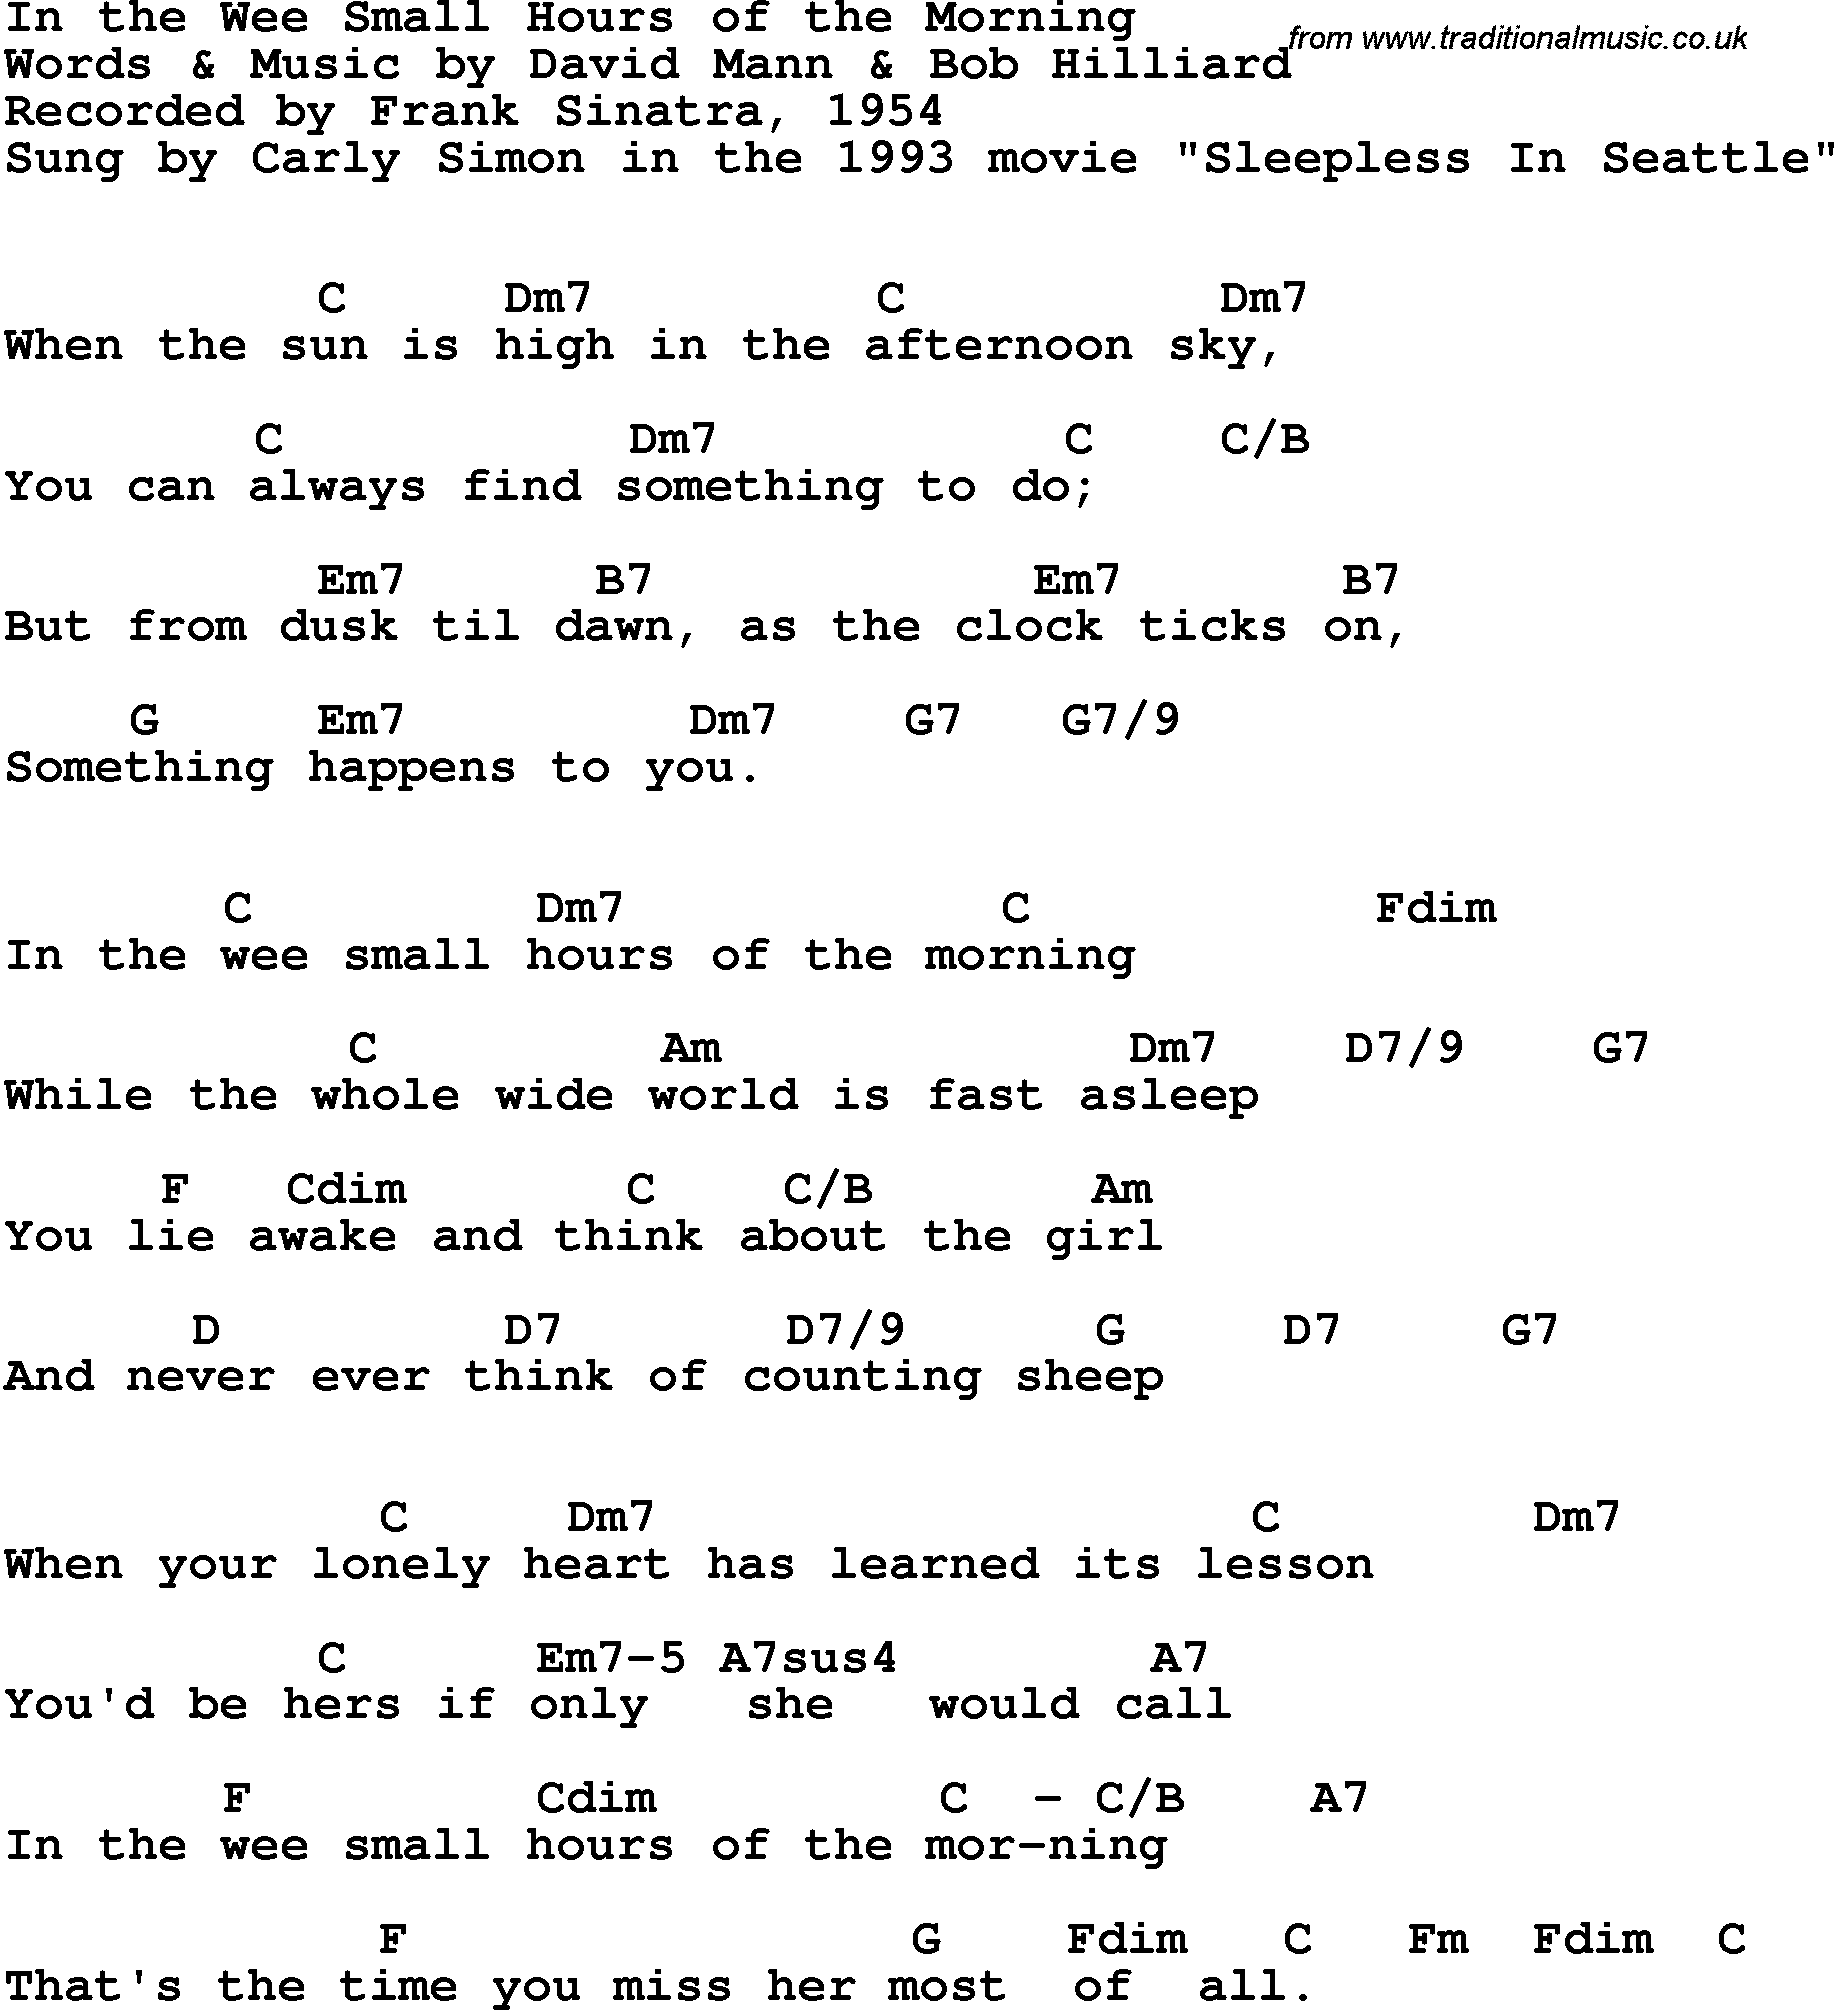 Song Lyrics with guitar chords for In The Wee Small Hours Of The Morning  - Frank Sinatra, 1954